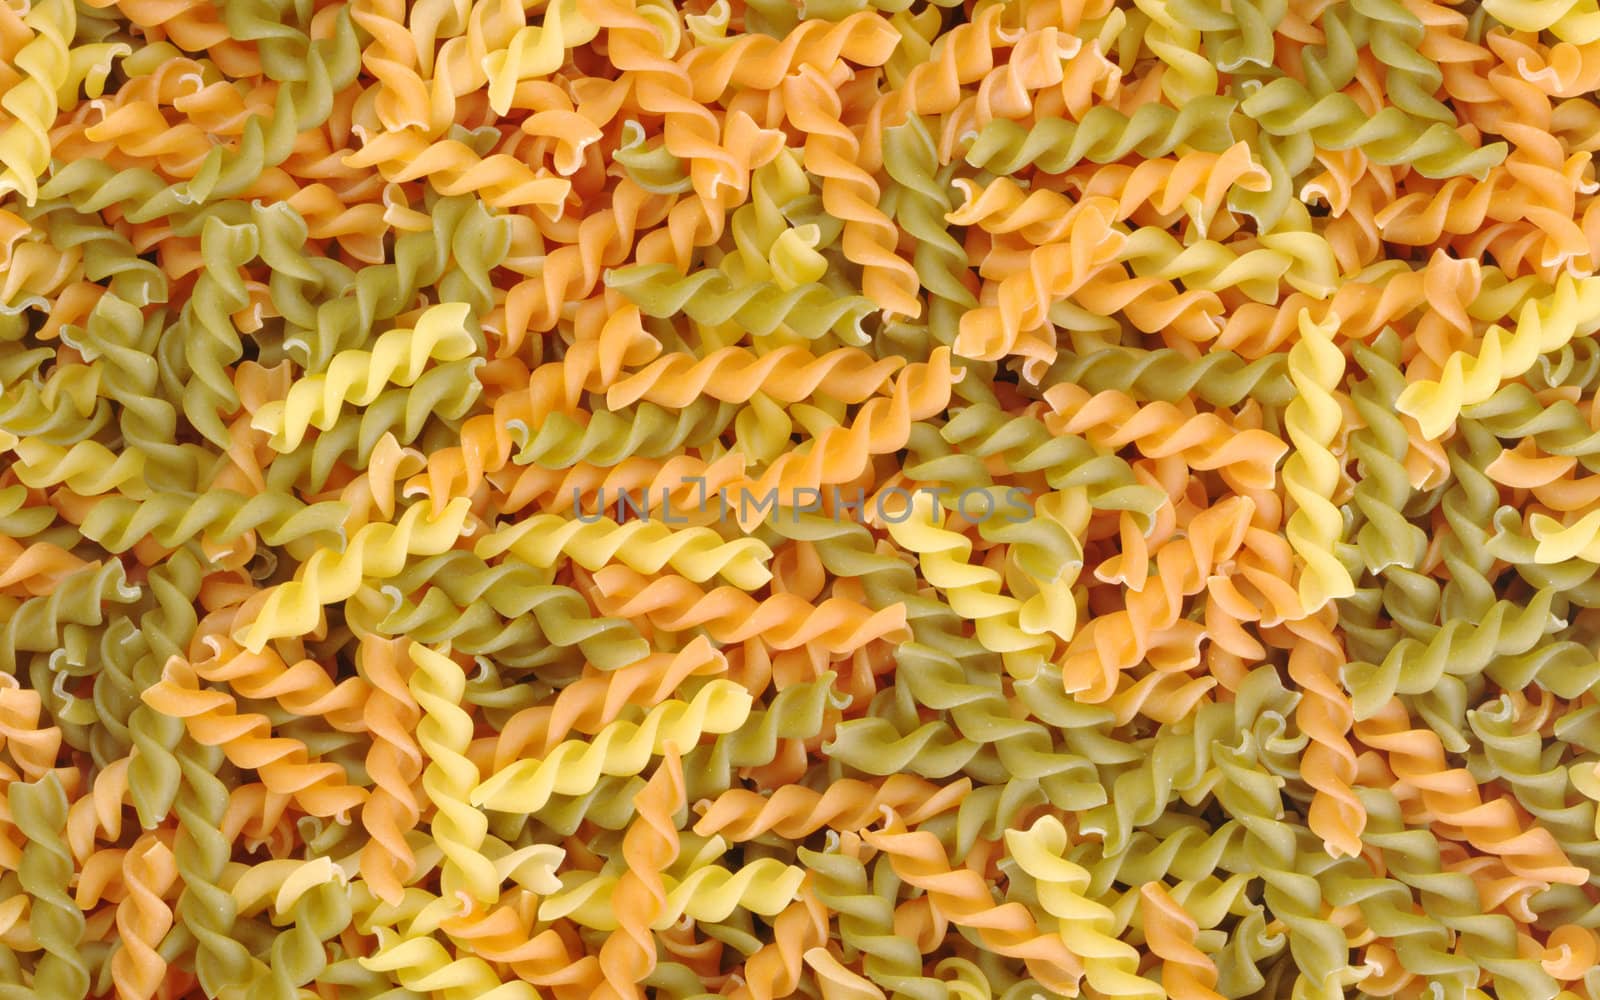 Uncooked pasta (Fusilli) in different colour as background